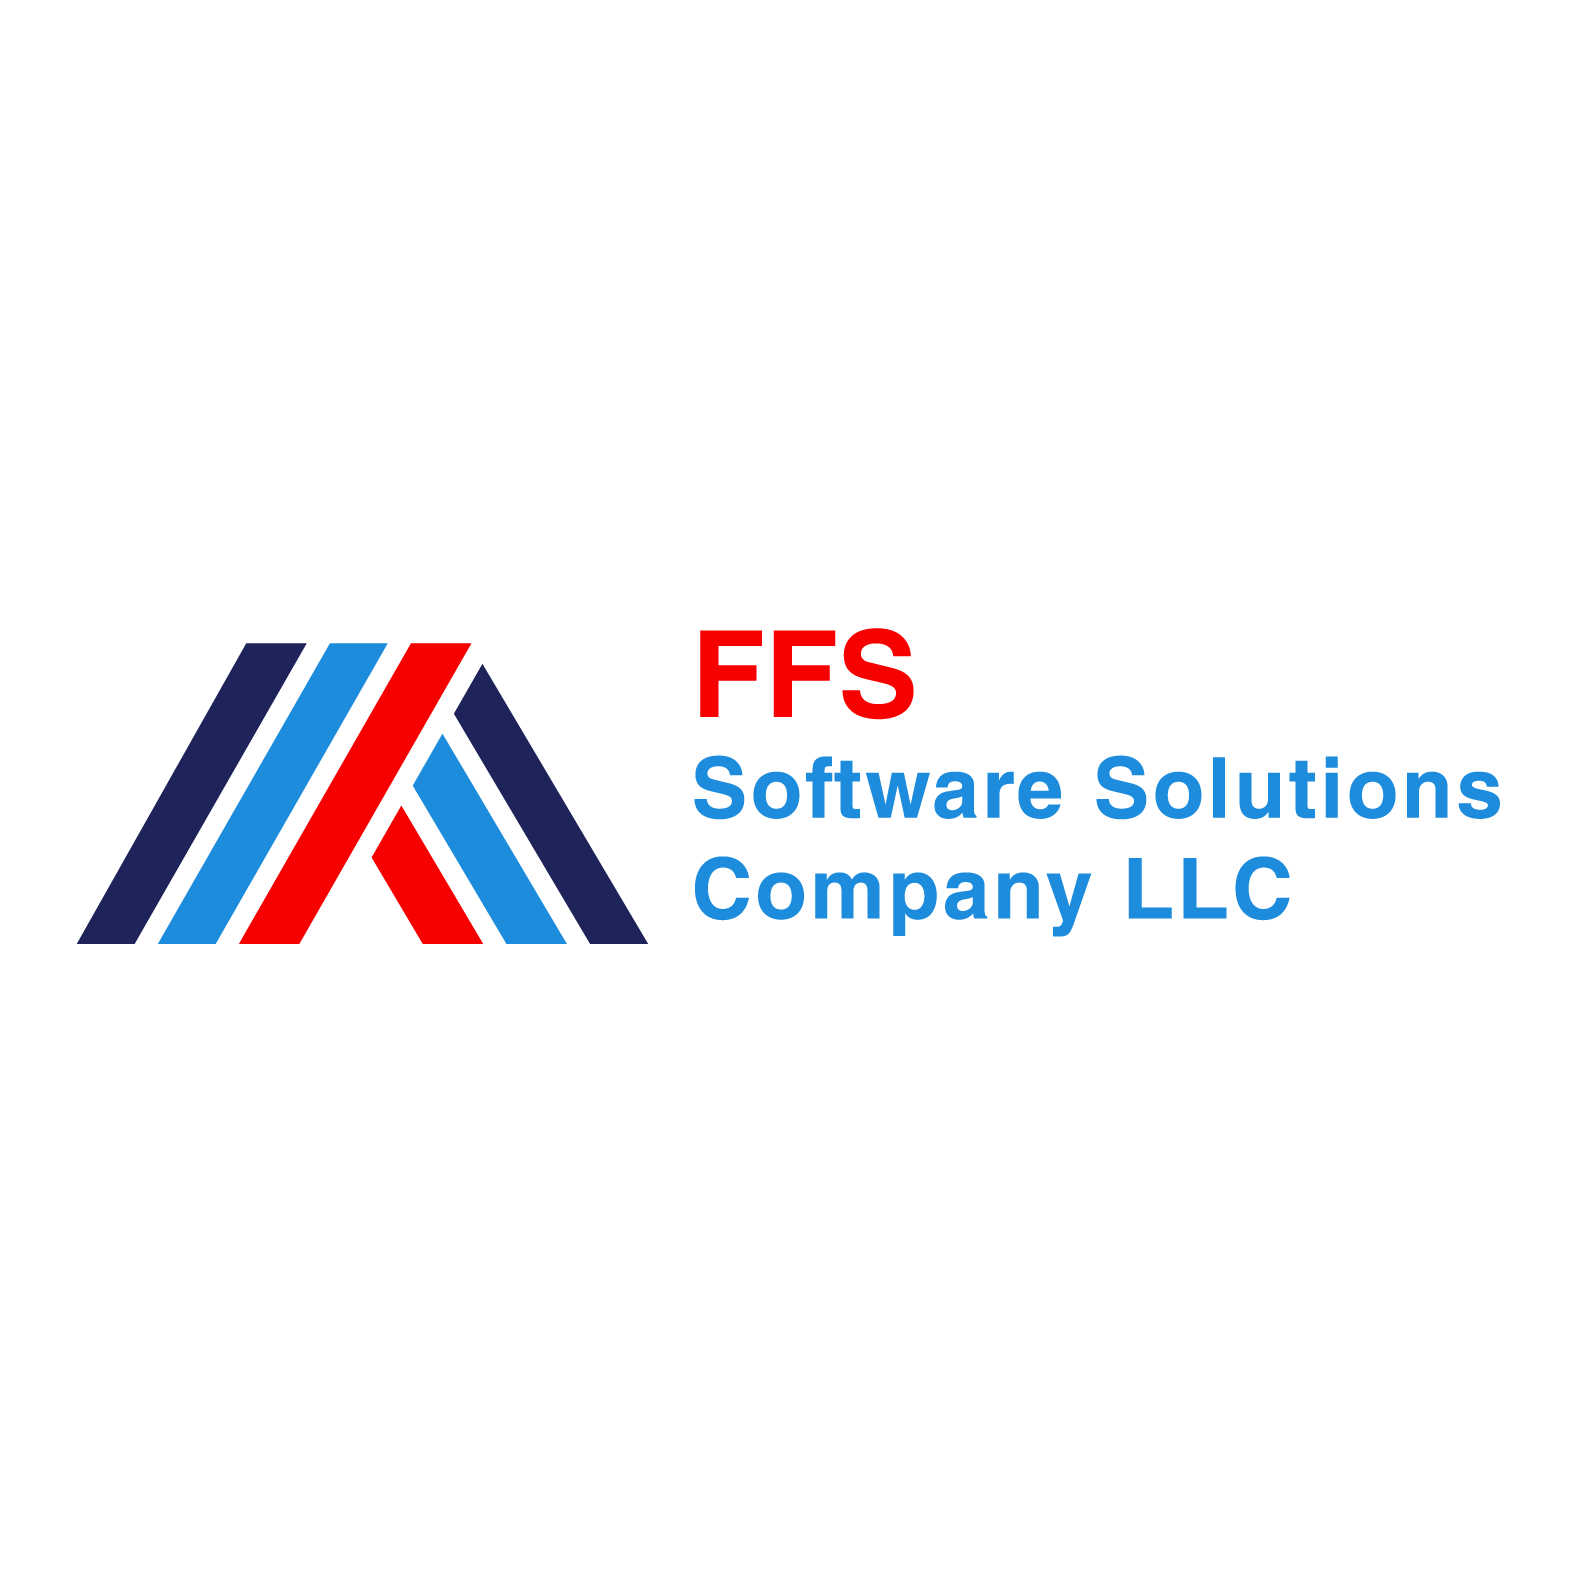 FFS Software Solutions Company